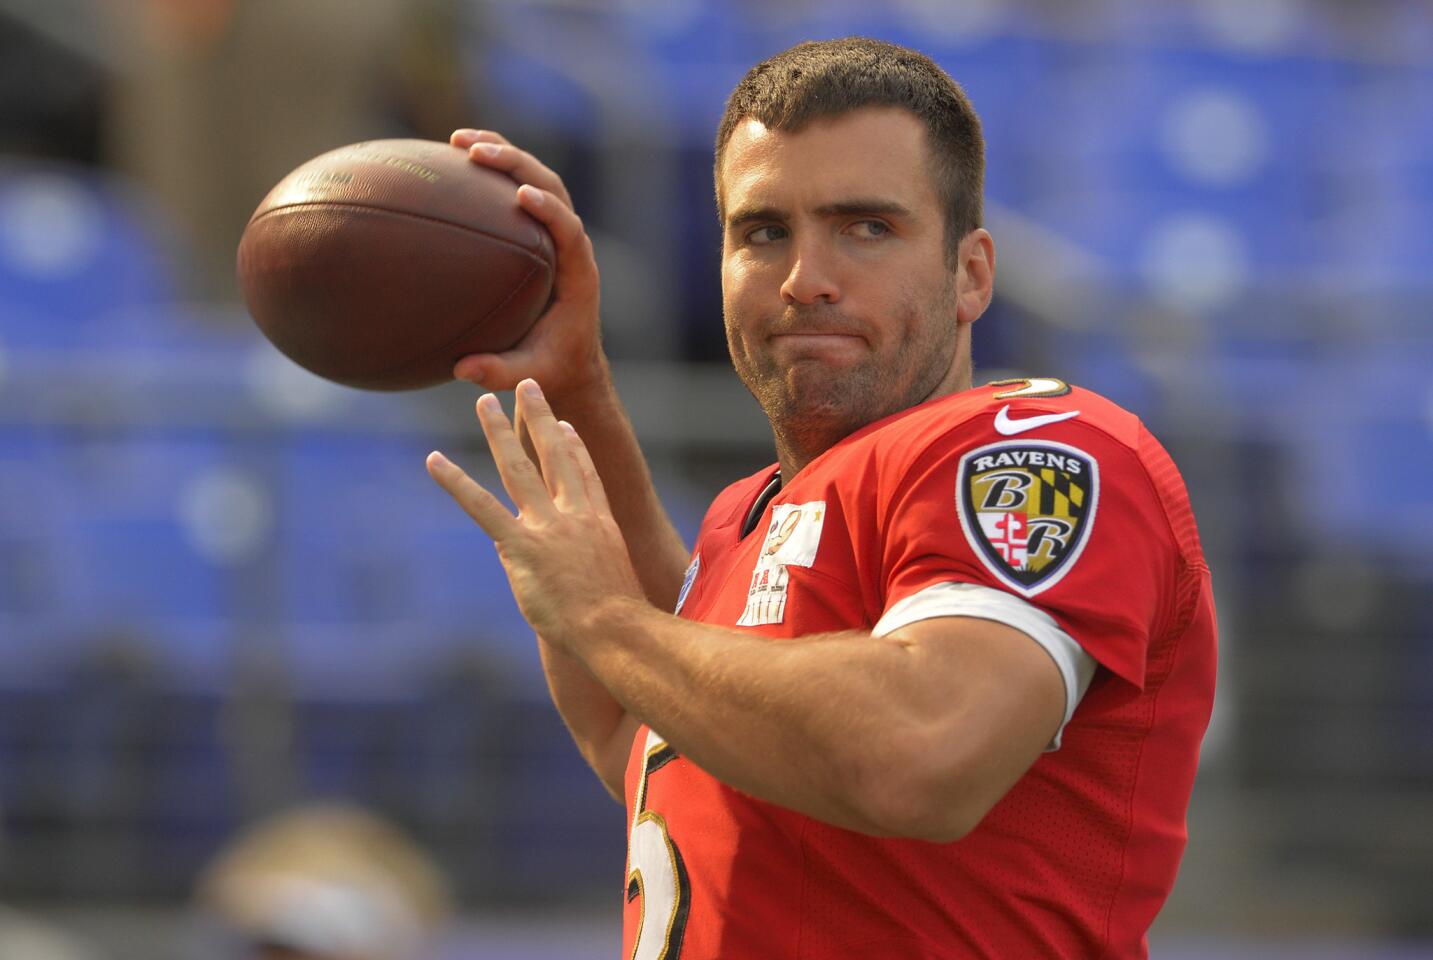 Flacco at M&T in 2013